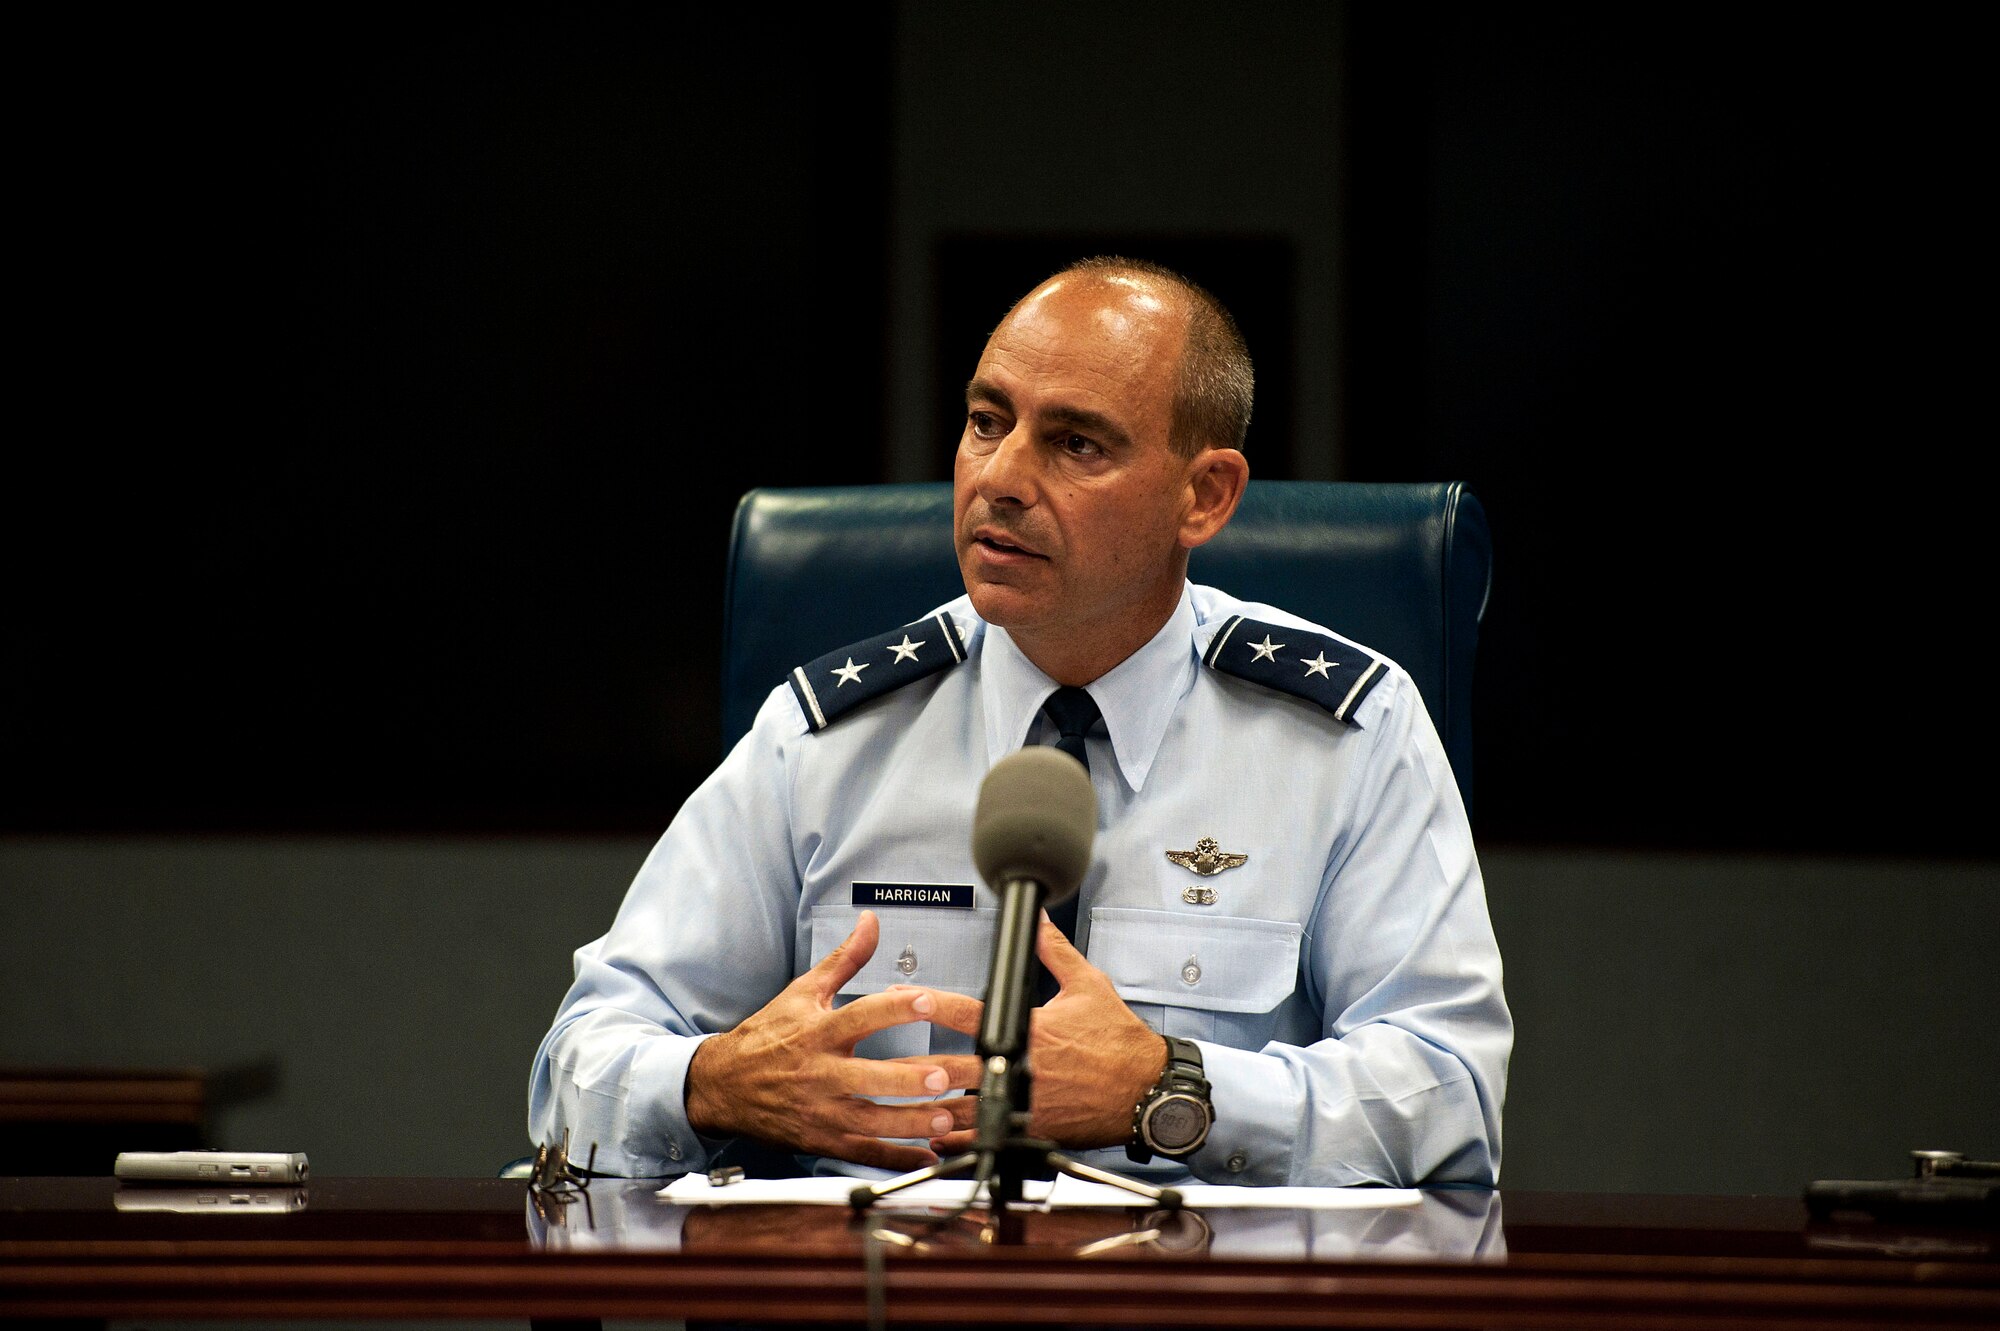 Maj. Gen. Jeffrey L. Harrigian speaks to the media in a press briefing Sept. 29, 2014, at the Pentagon, about decisive impacts airpower can bring to the current fight against ISIL. He indicated a broad coalition effort will continue to be the cornerstone for providing a persistent and lethal threat to ISIL forces. (U.S. Air force photo/Staff Sgt. Anthony Nelson Jr.) 